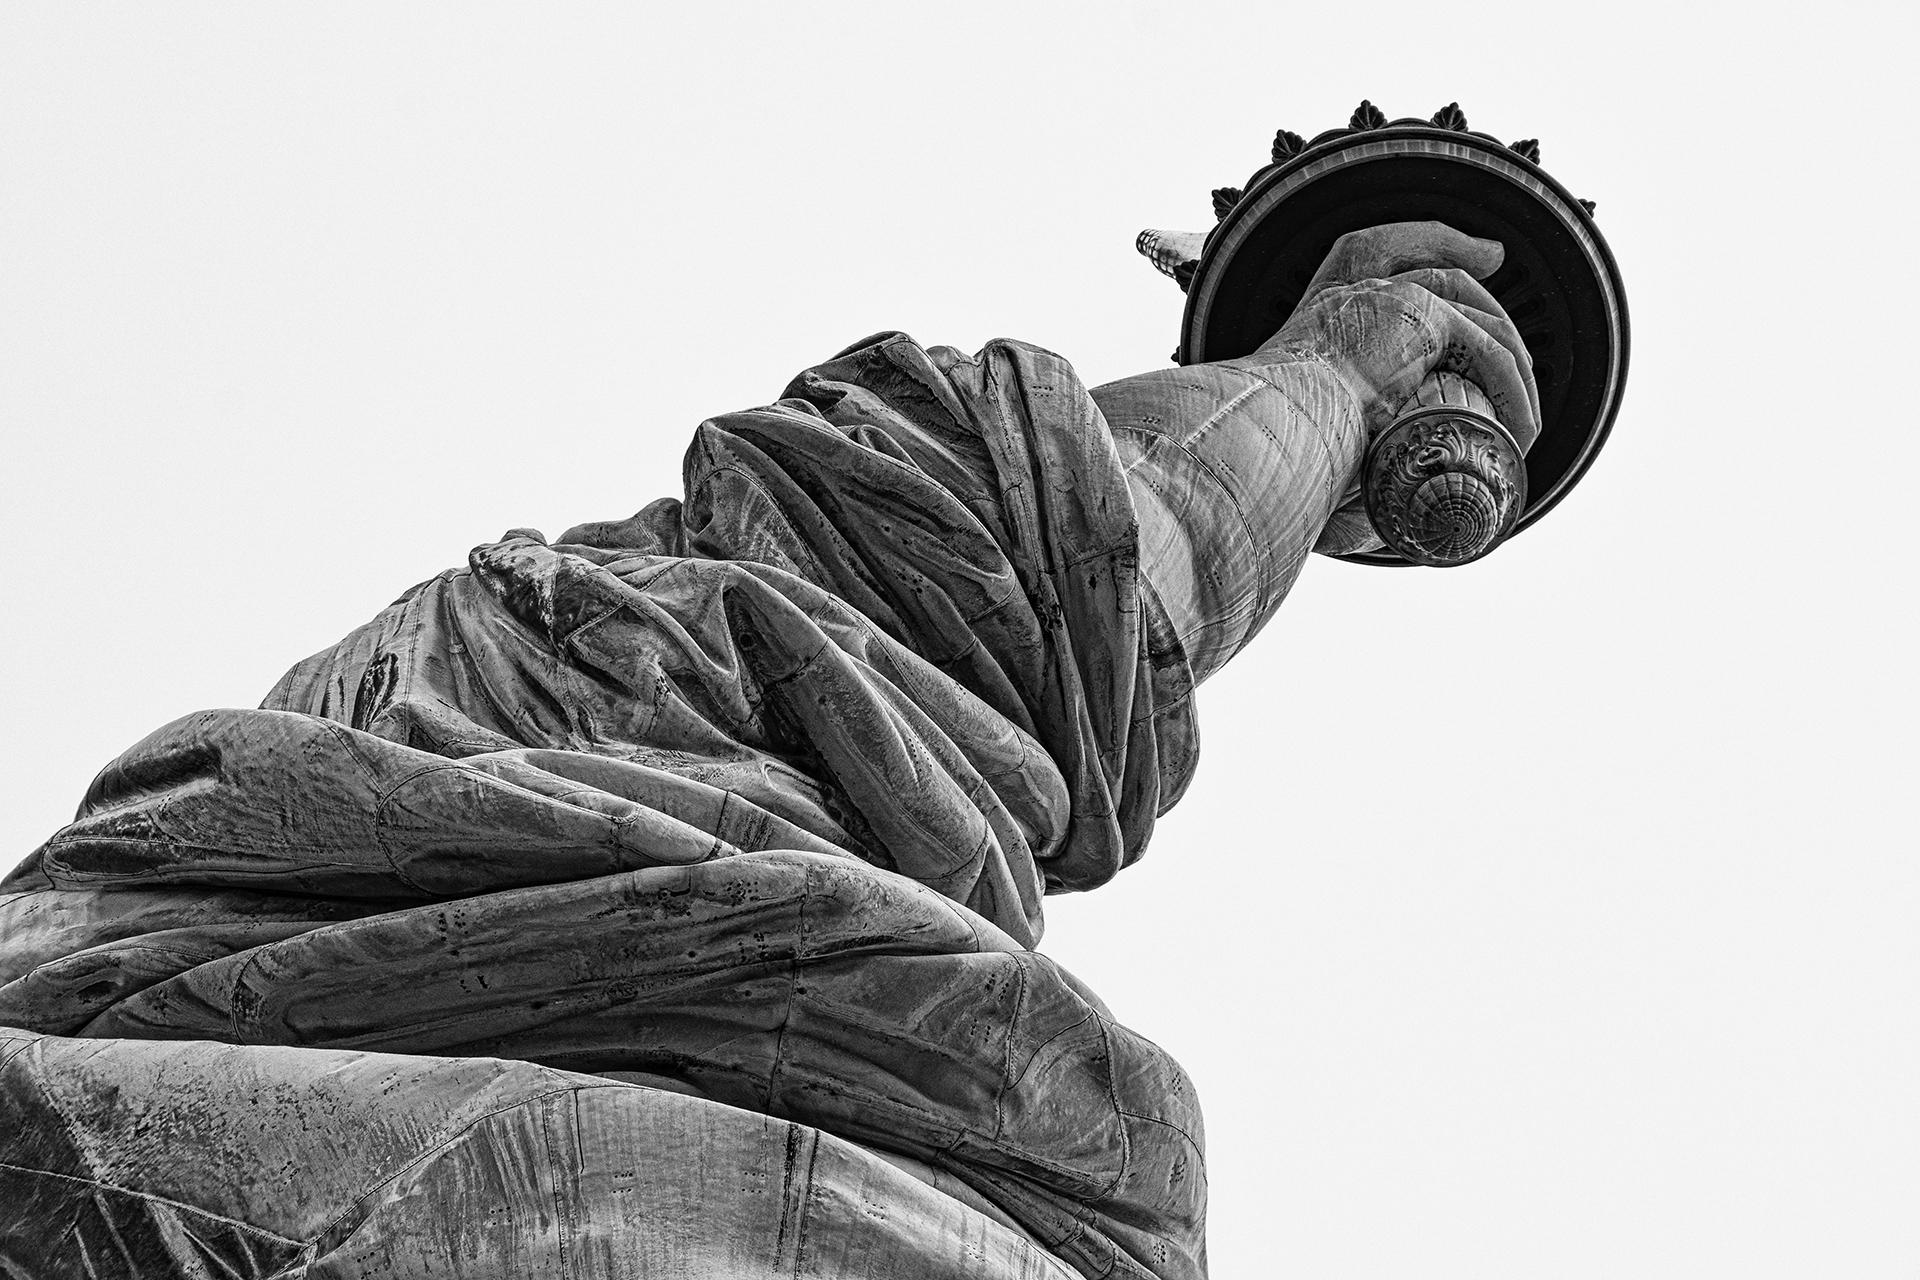 New York Photography Awards Winner - Holding the Torch